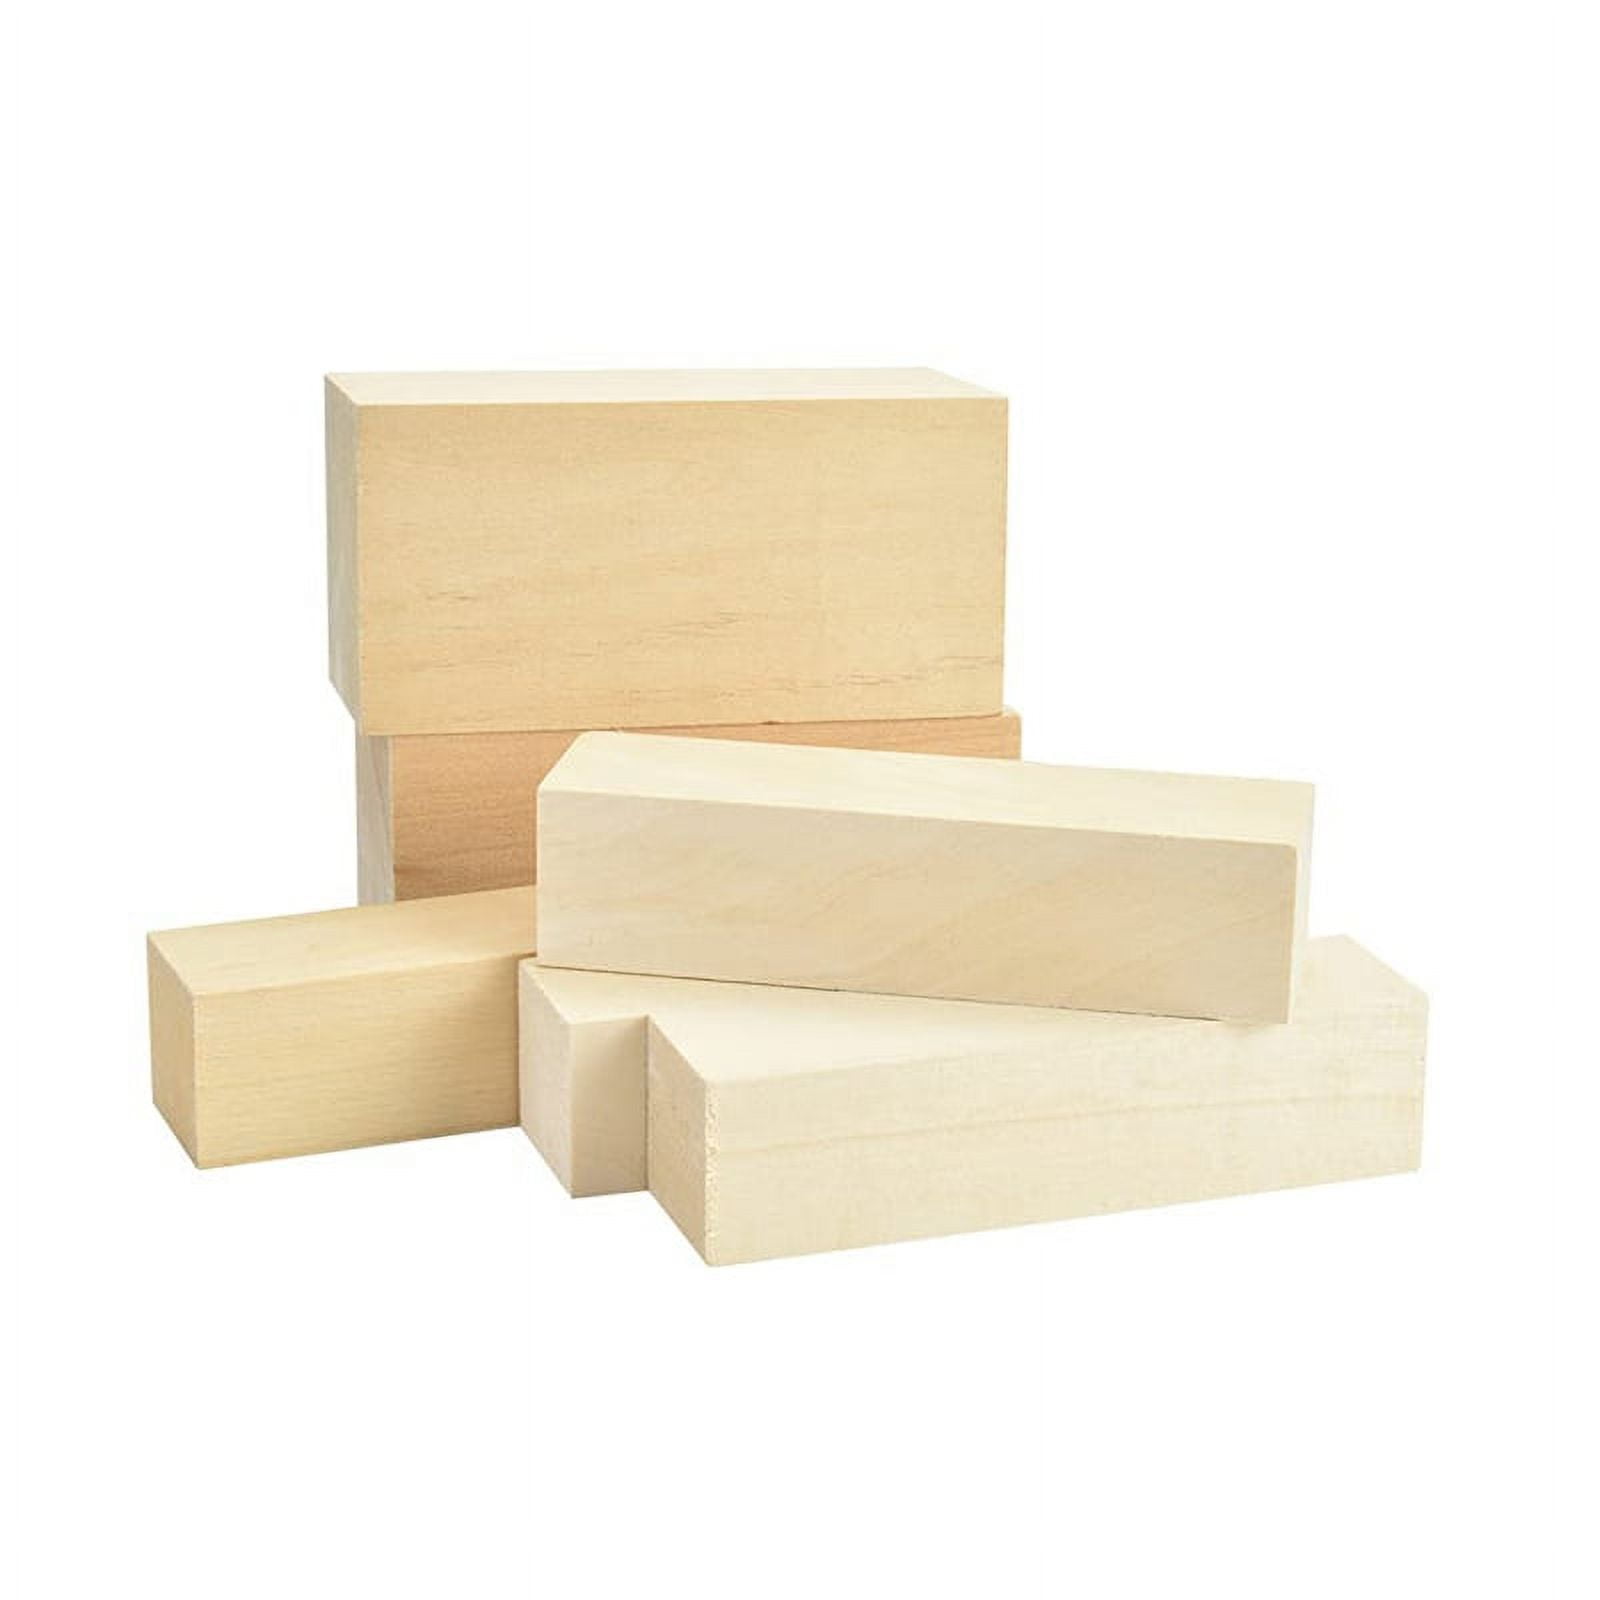 Basswood Carving Block - 1.75 x 3.5 x 10 - The Compleat Sculptor